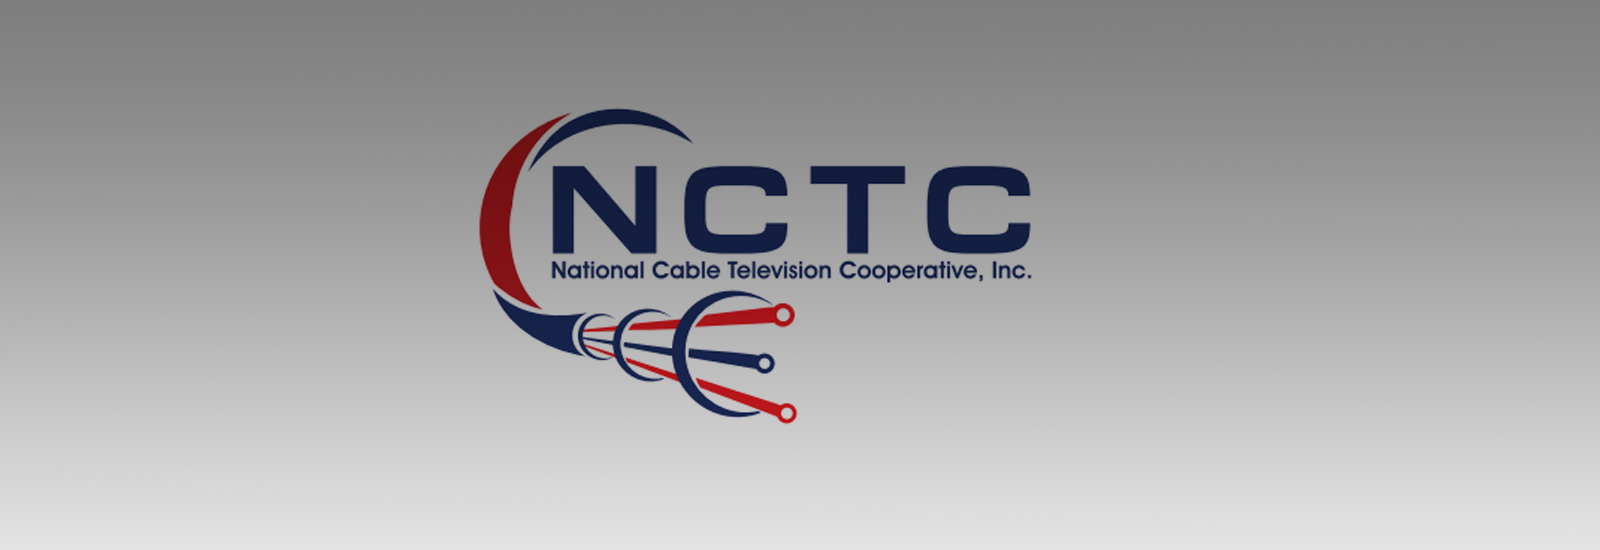 HITN Expands Its Distribution Opportunities Through The National Cable Television Cooperation (NCTC)